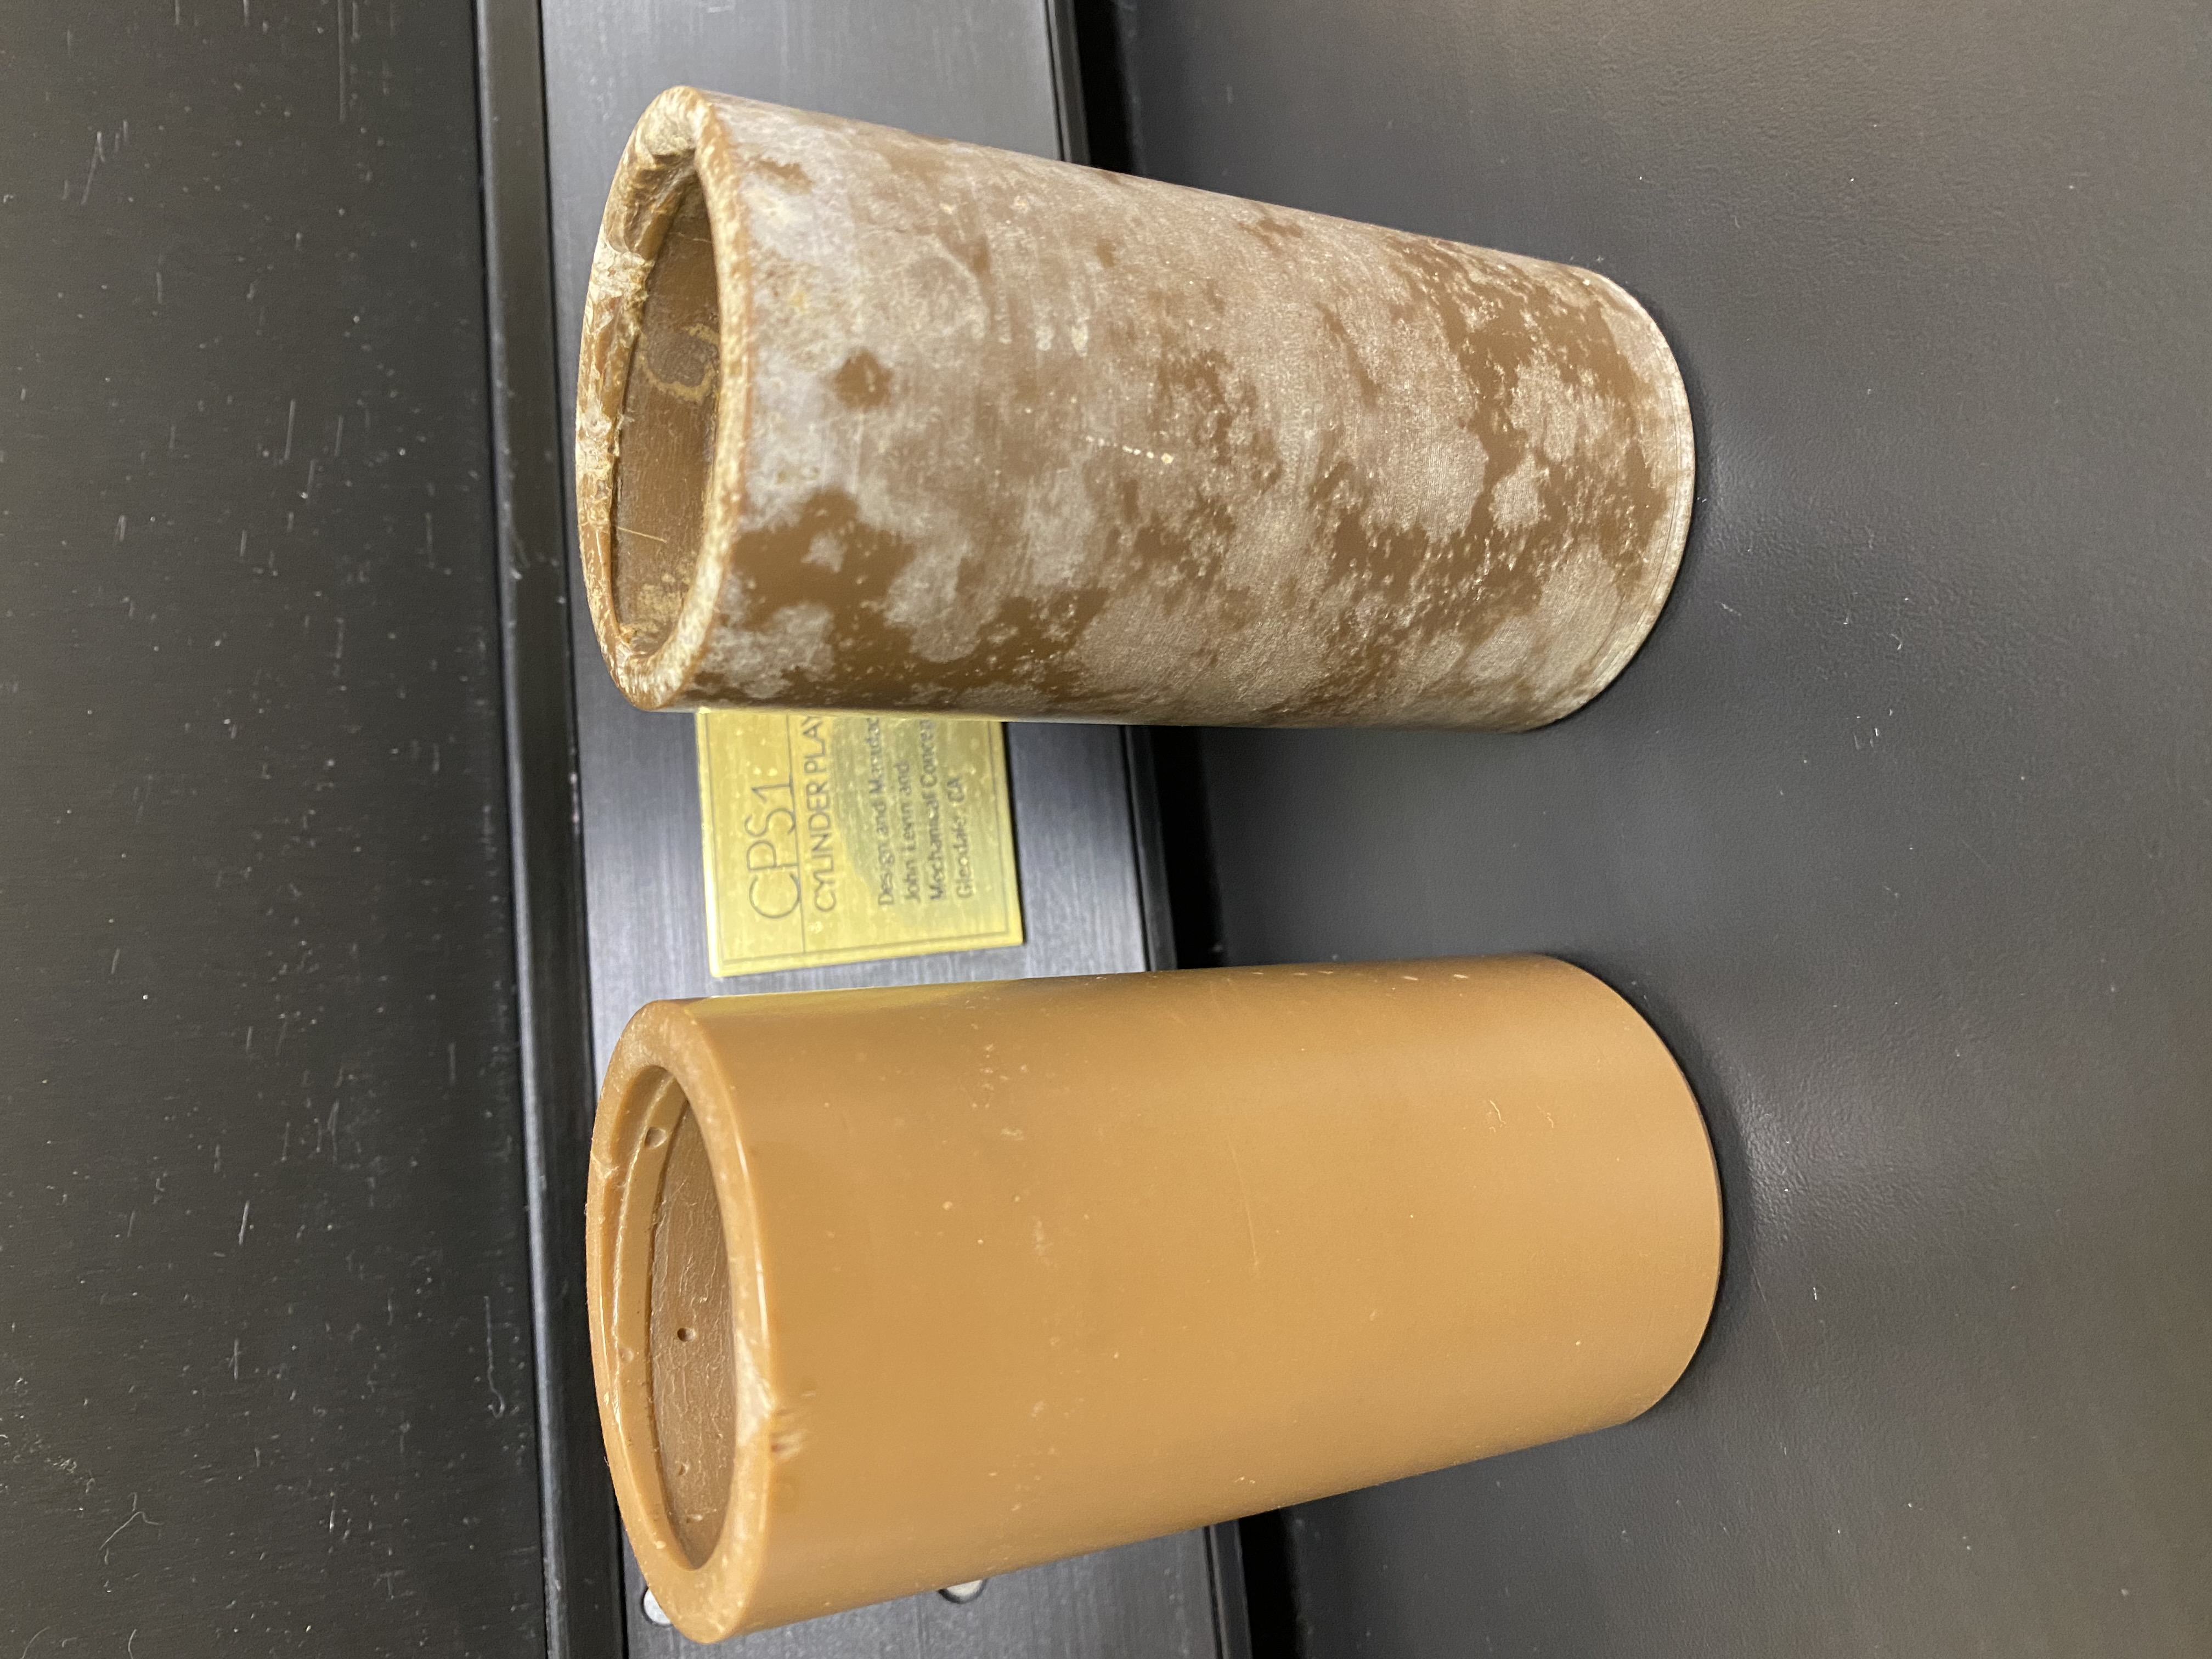 An early wax cylinder that suffered damage from improper storage (right) next to one that fared better (left).